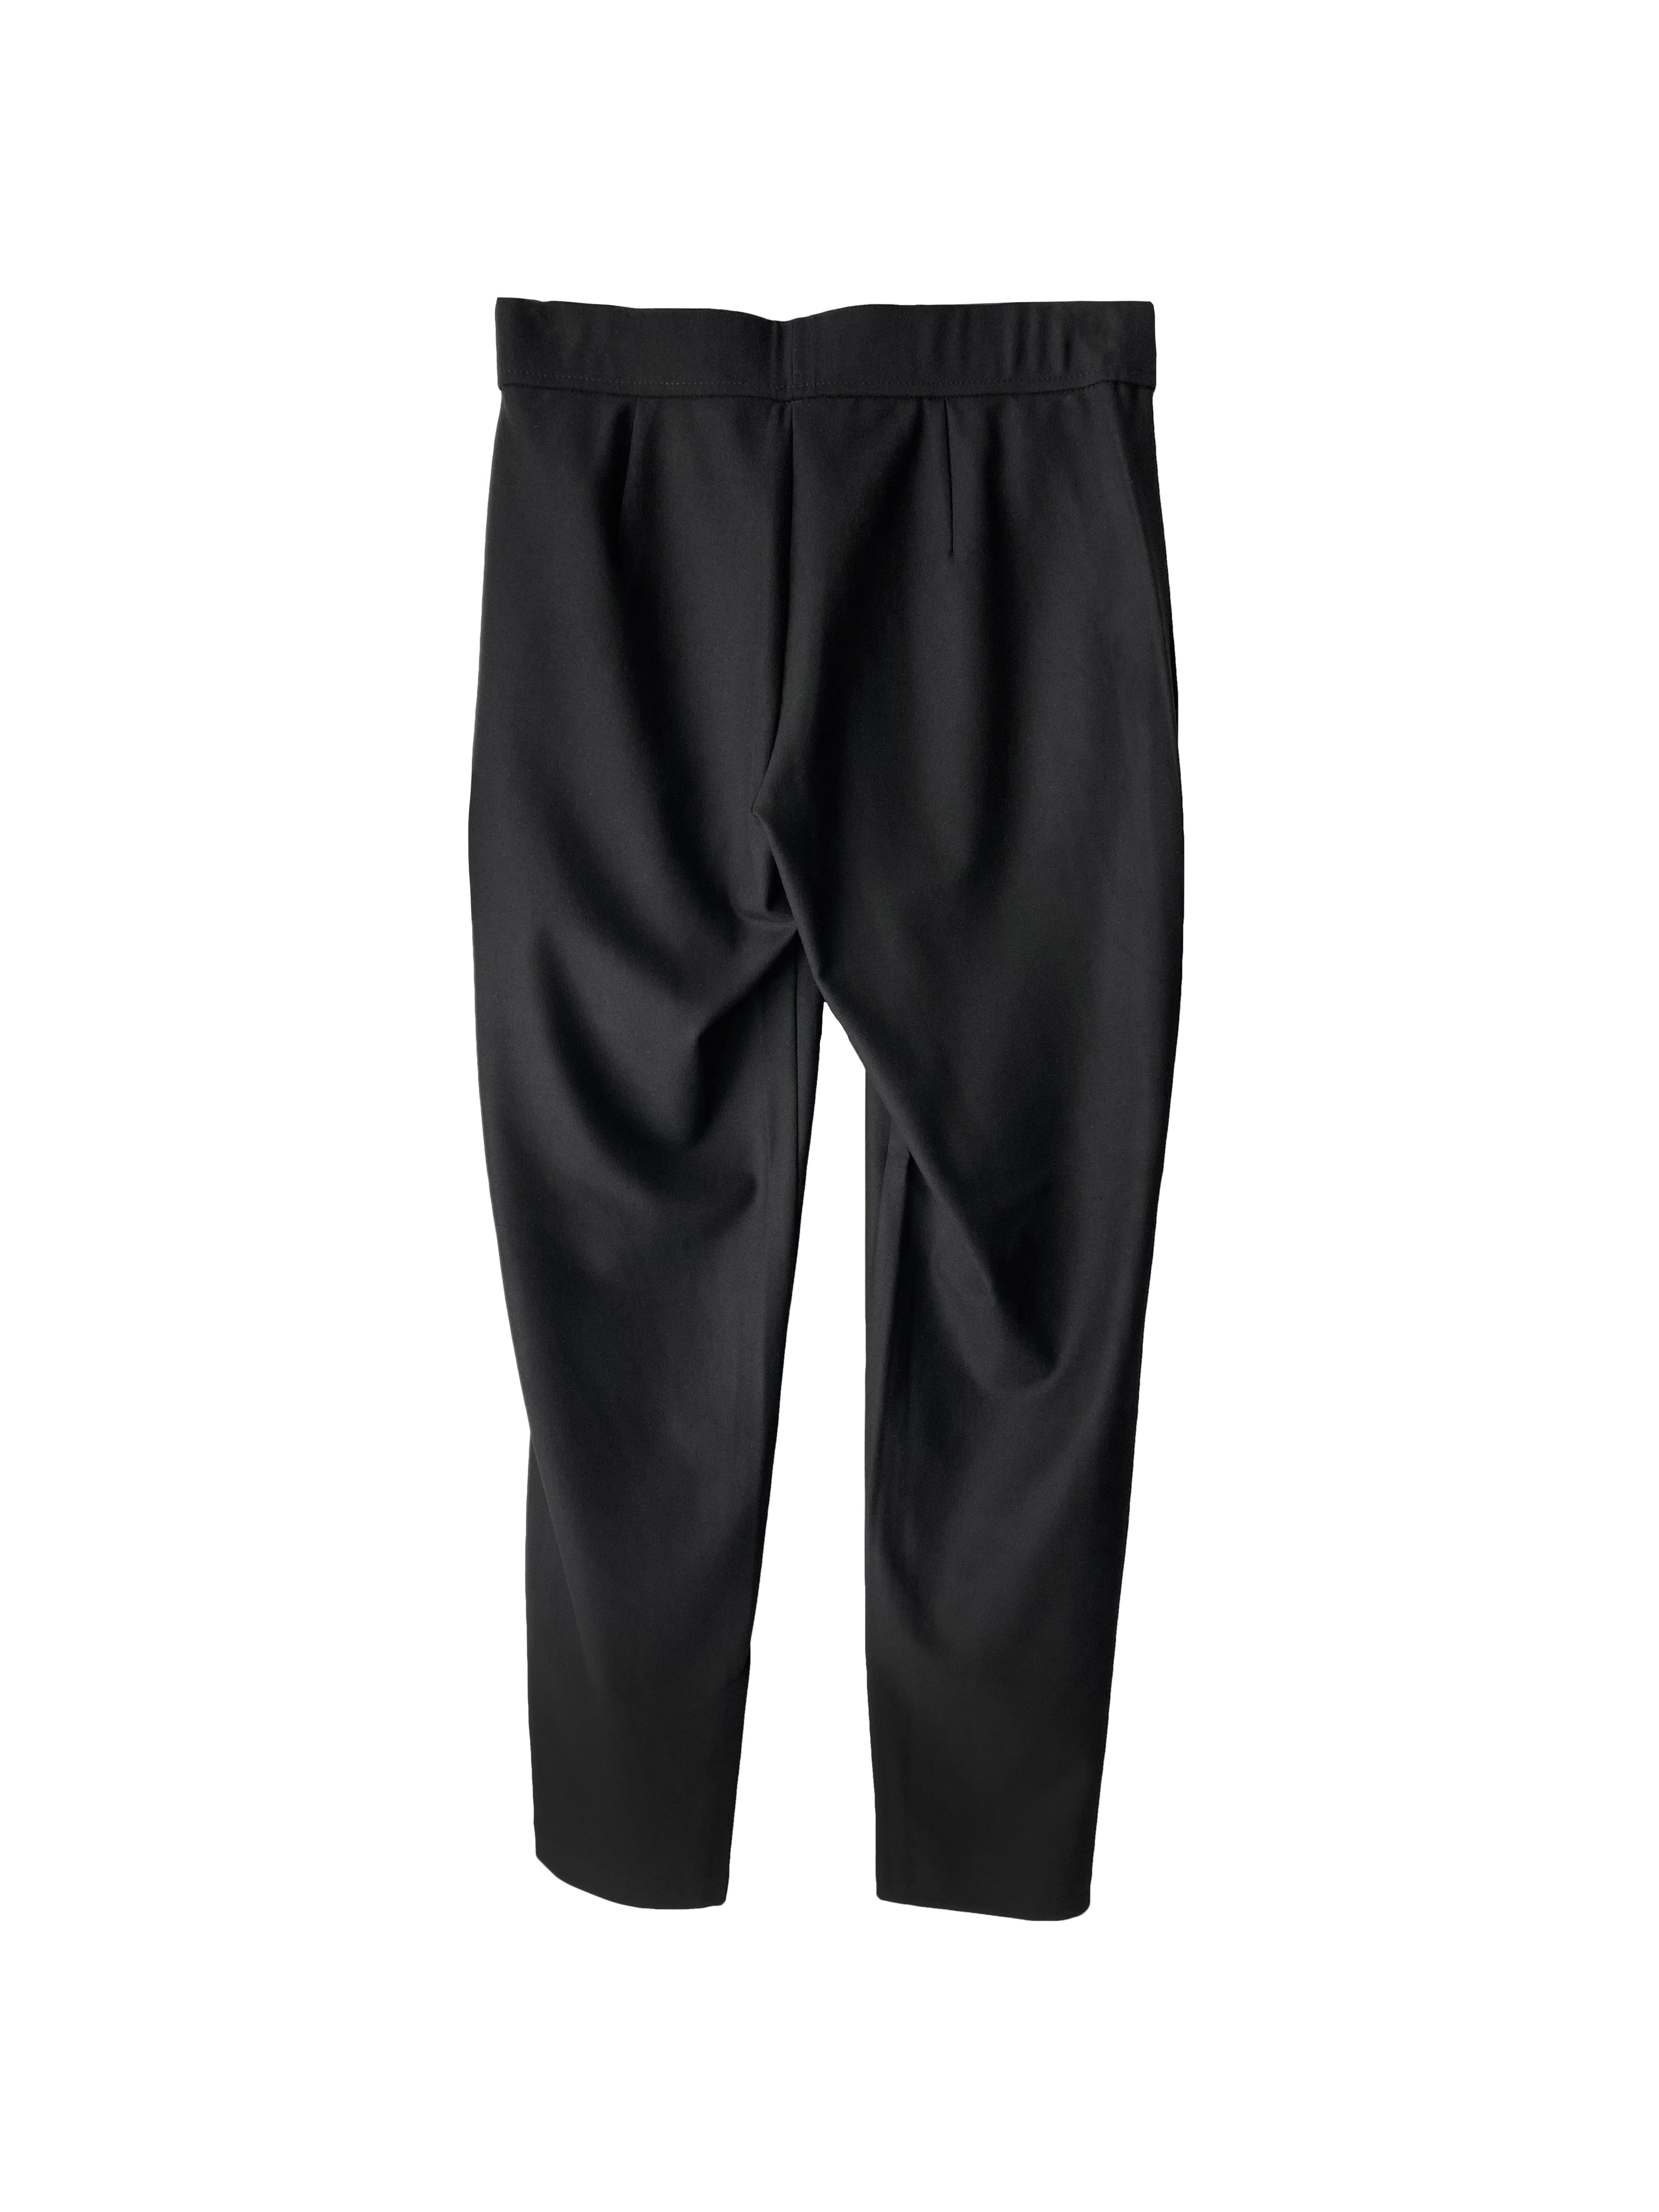 CANDICE O FLANNEL PANT BLACK